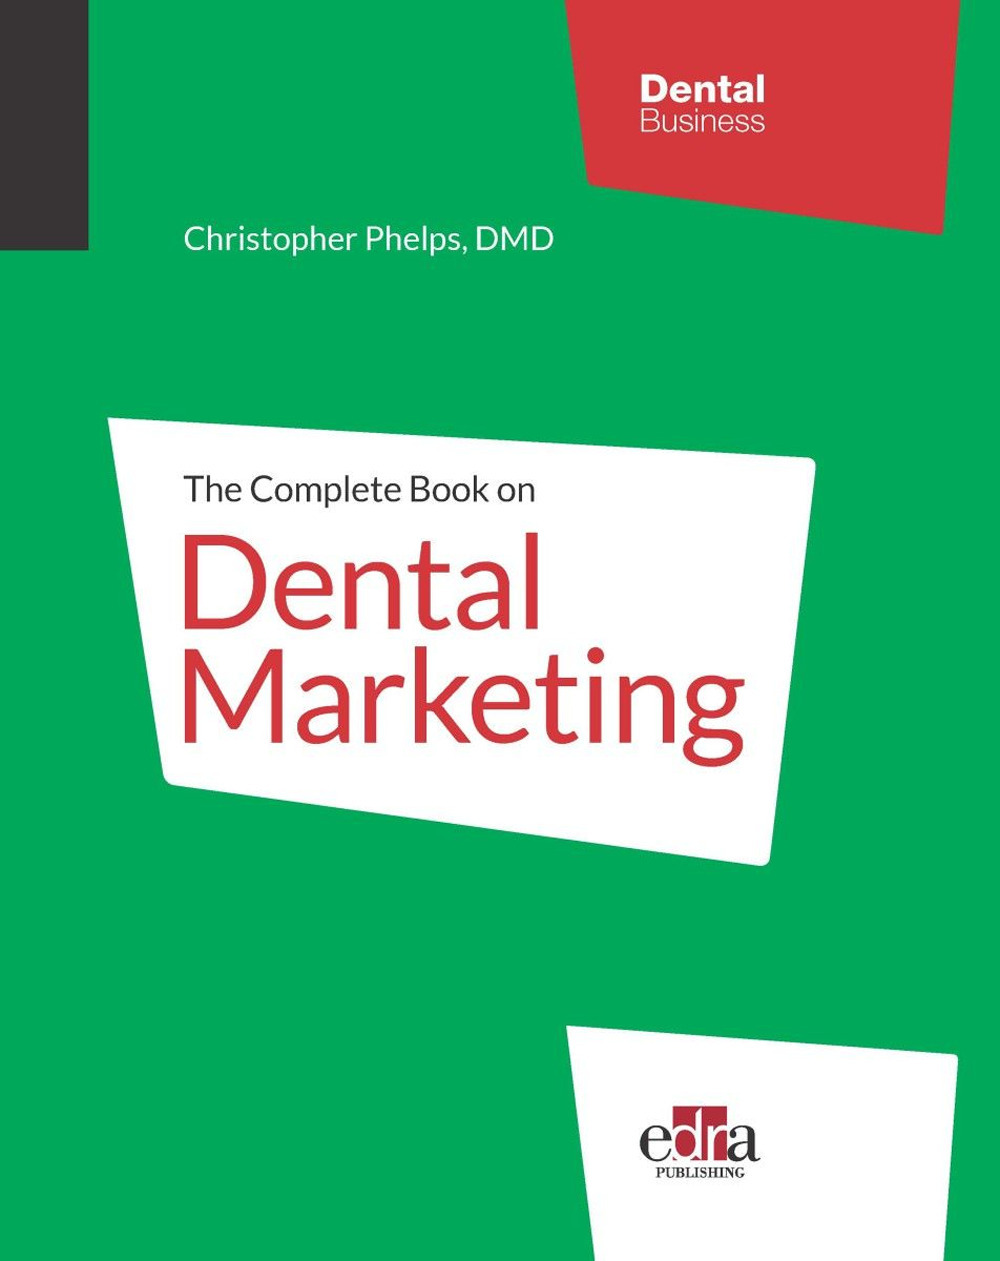 The complete book on dental marketing